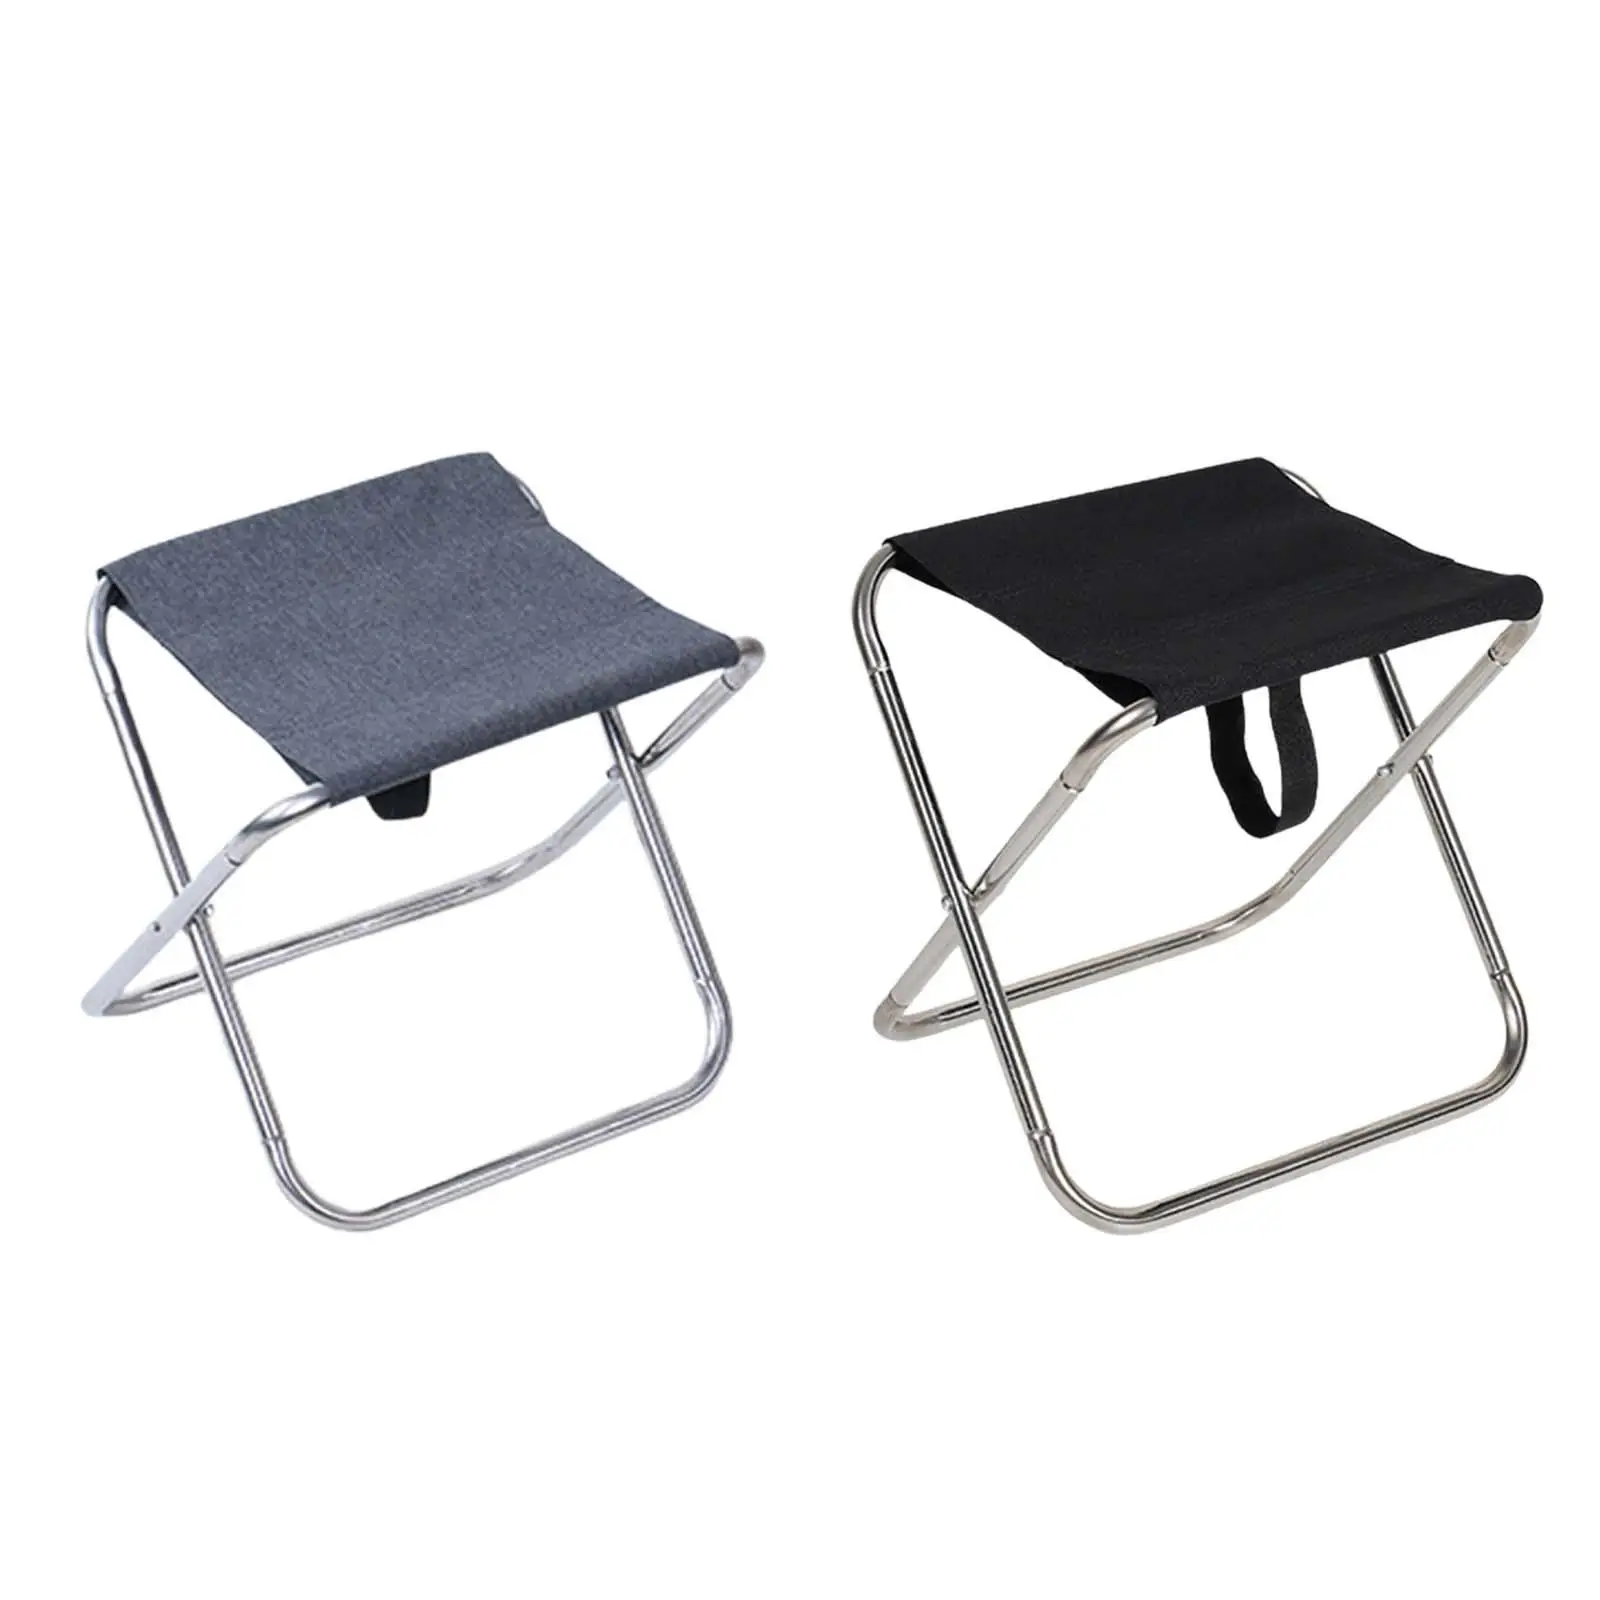 Camping Stool Folding Adults Strong Load Capacity Camping Chair Picnic Chair Portable for Party Patio Traveling Gardening Hiking